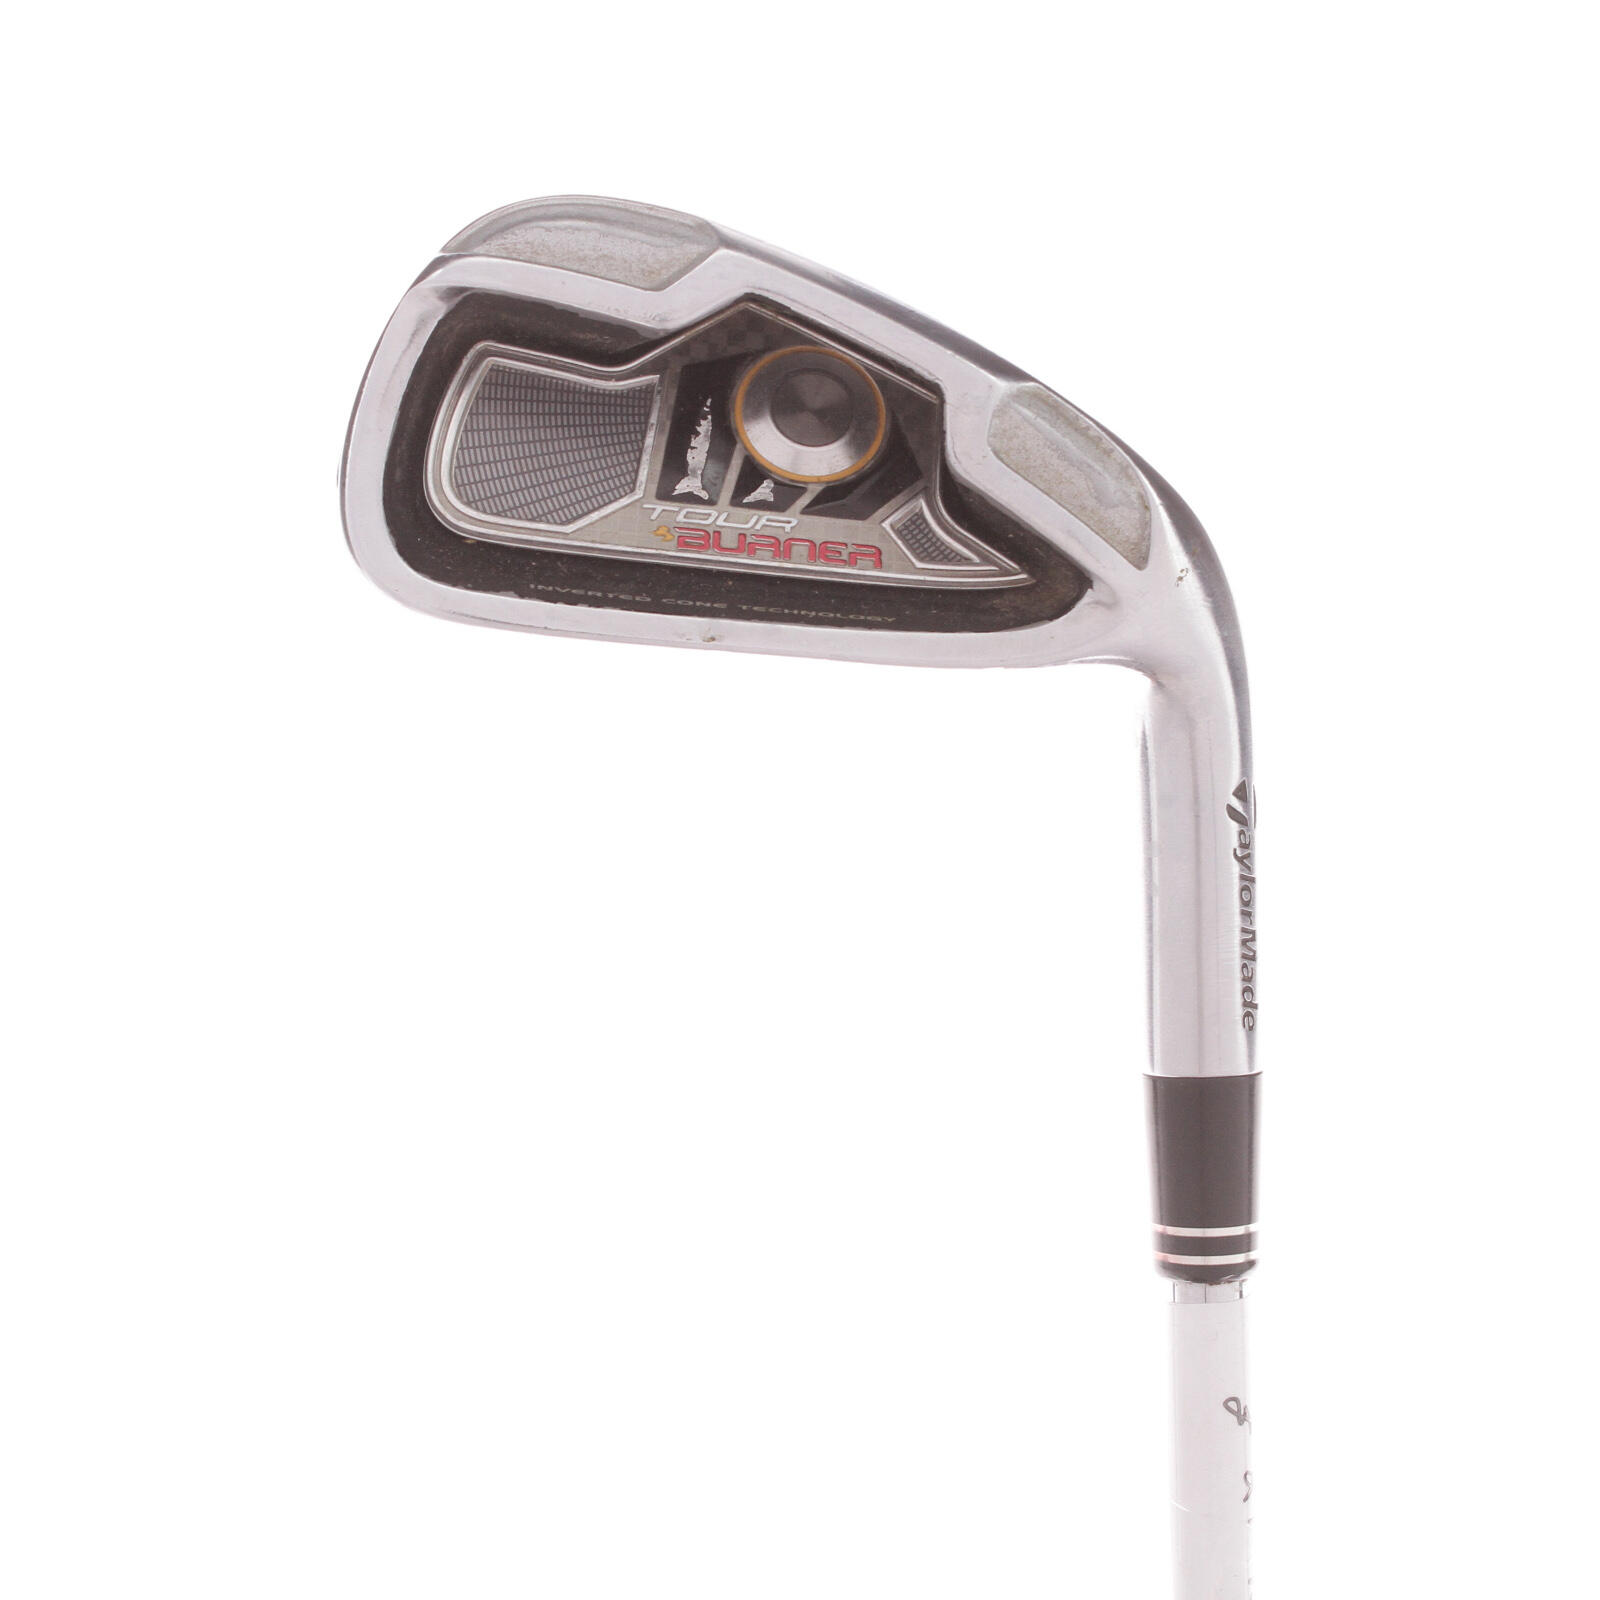 TAYLORMADE USED - 6 Iron TaylorMade Burner Tour Steel Regular Shaft Right Handed - GRADE B